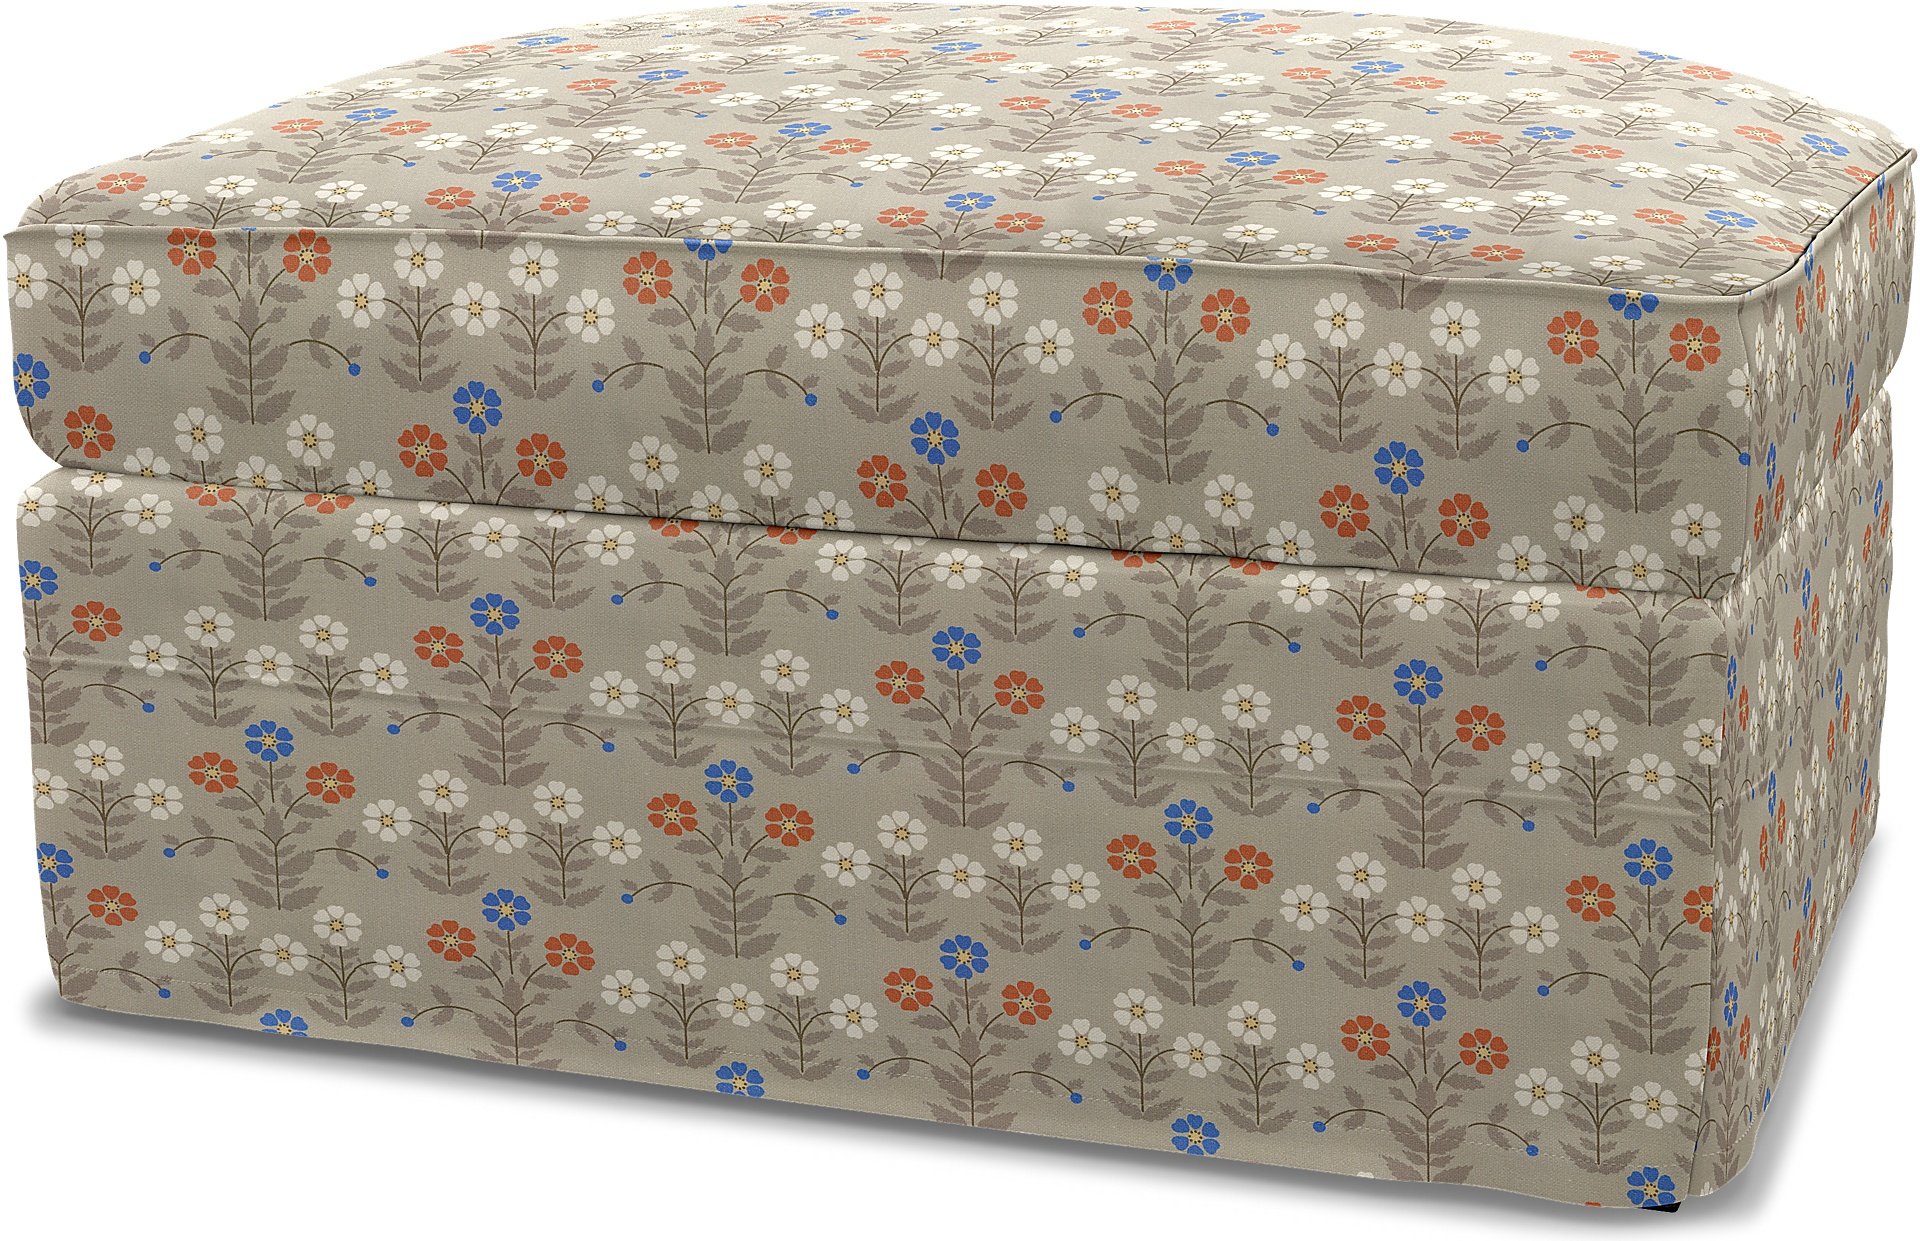 IKEA - Gronlid Footstool with Storage Cover, Sippor Blue/Orange, BEMZ x BORASTAPETER COLLECTION - Be